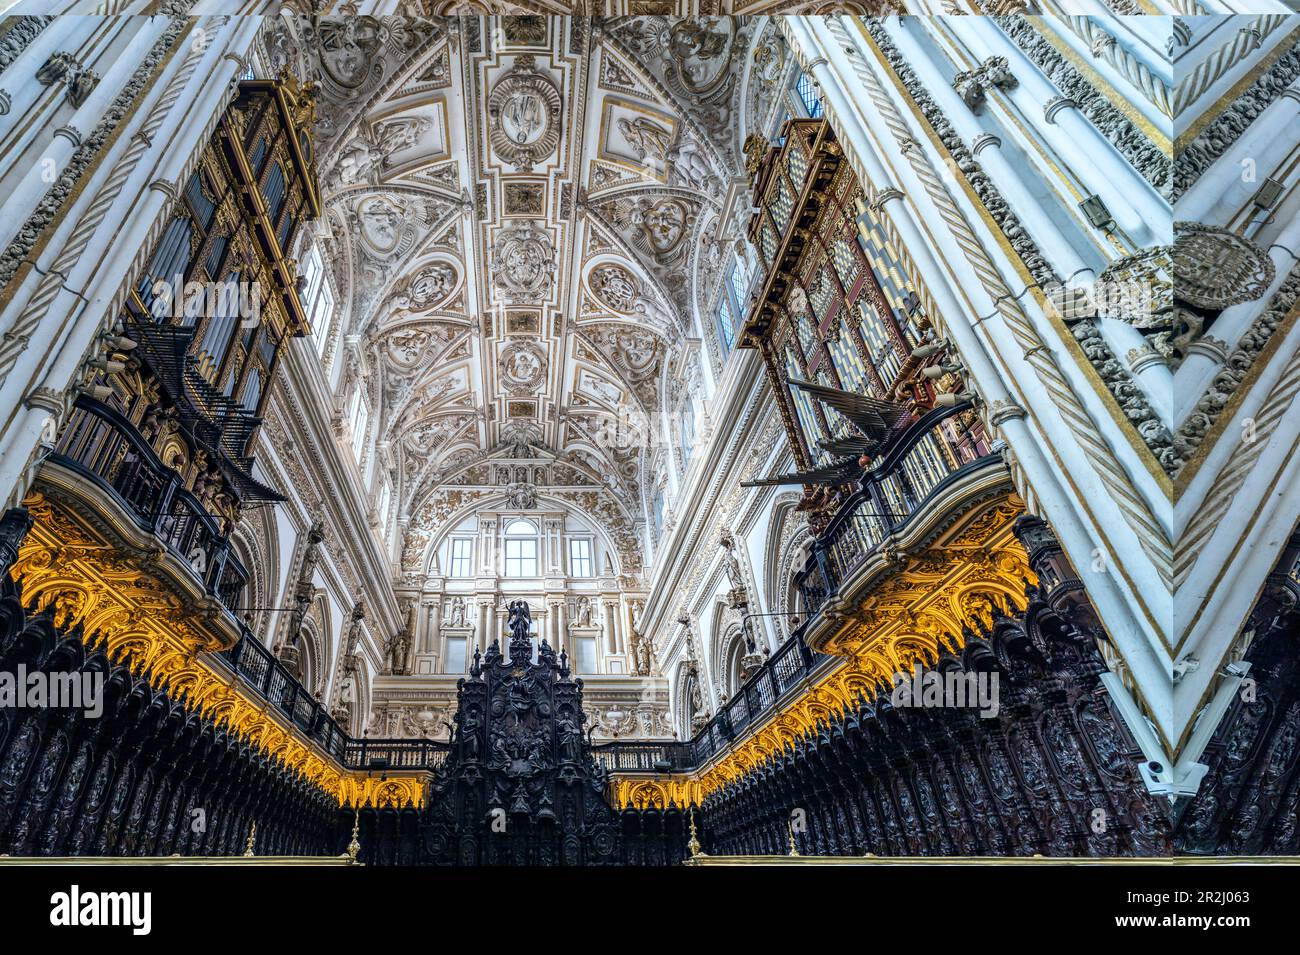 Organ and choir in the interior of the Cathedral - Mezquita - Catedral de Cordoba in Cordoba, Andalusia, Spain Stock Photo